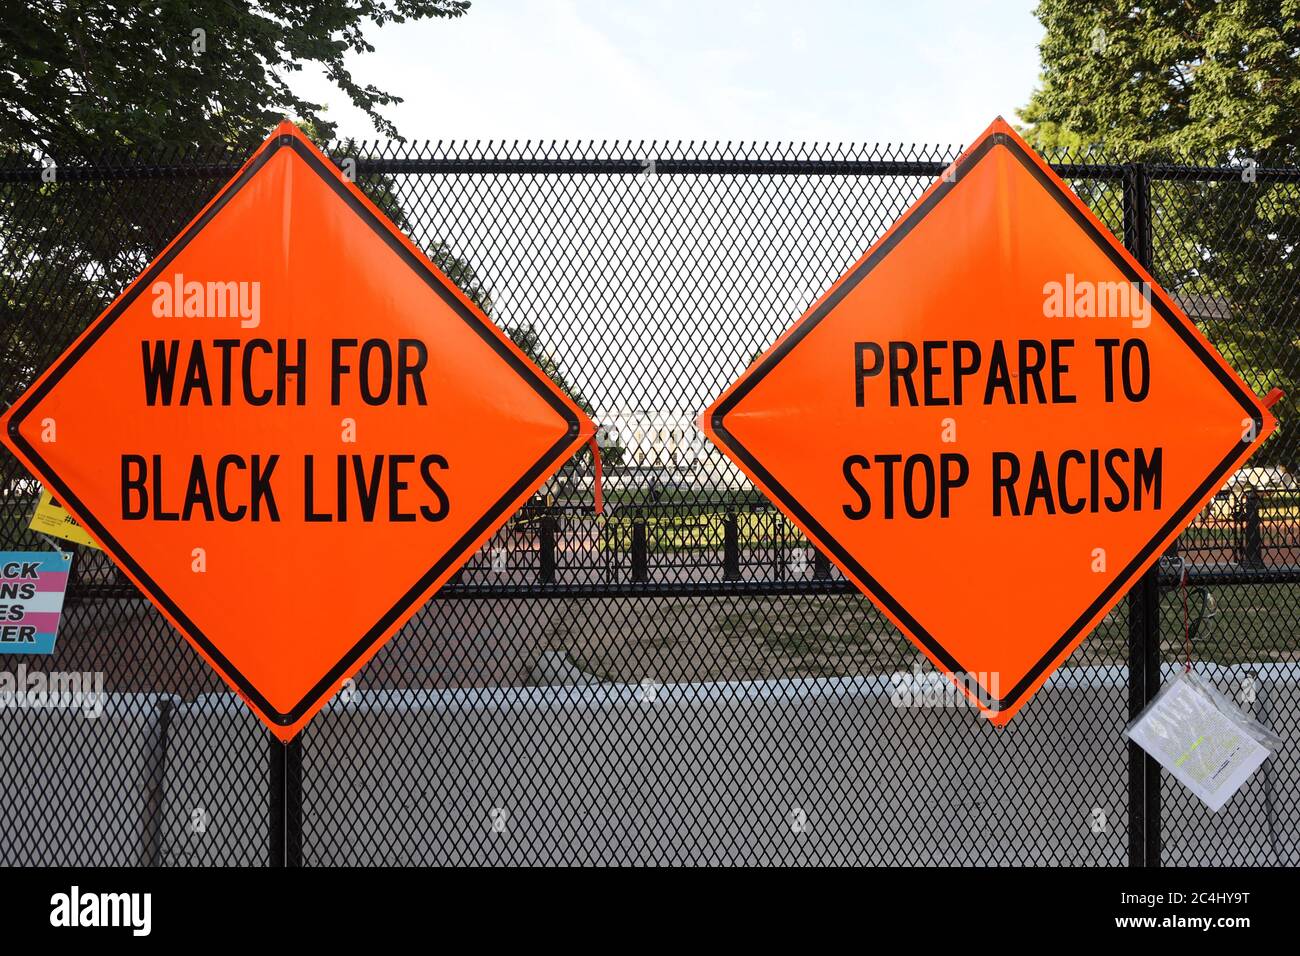 Washington, DC, USA. 27th June, 2020. View Of Black Lives Matters Plaza with signs reading 'Watch For Black Lives' and 'Prepare To Stop Racism' in Advance of Another Busy Weekend in Washington, DC on June 27, 2020. Credit: Mpi34/Media Punch/Alamy Live News Stock Photo